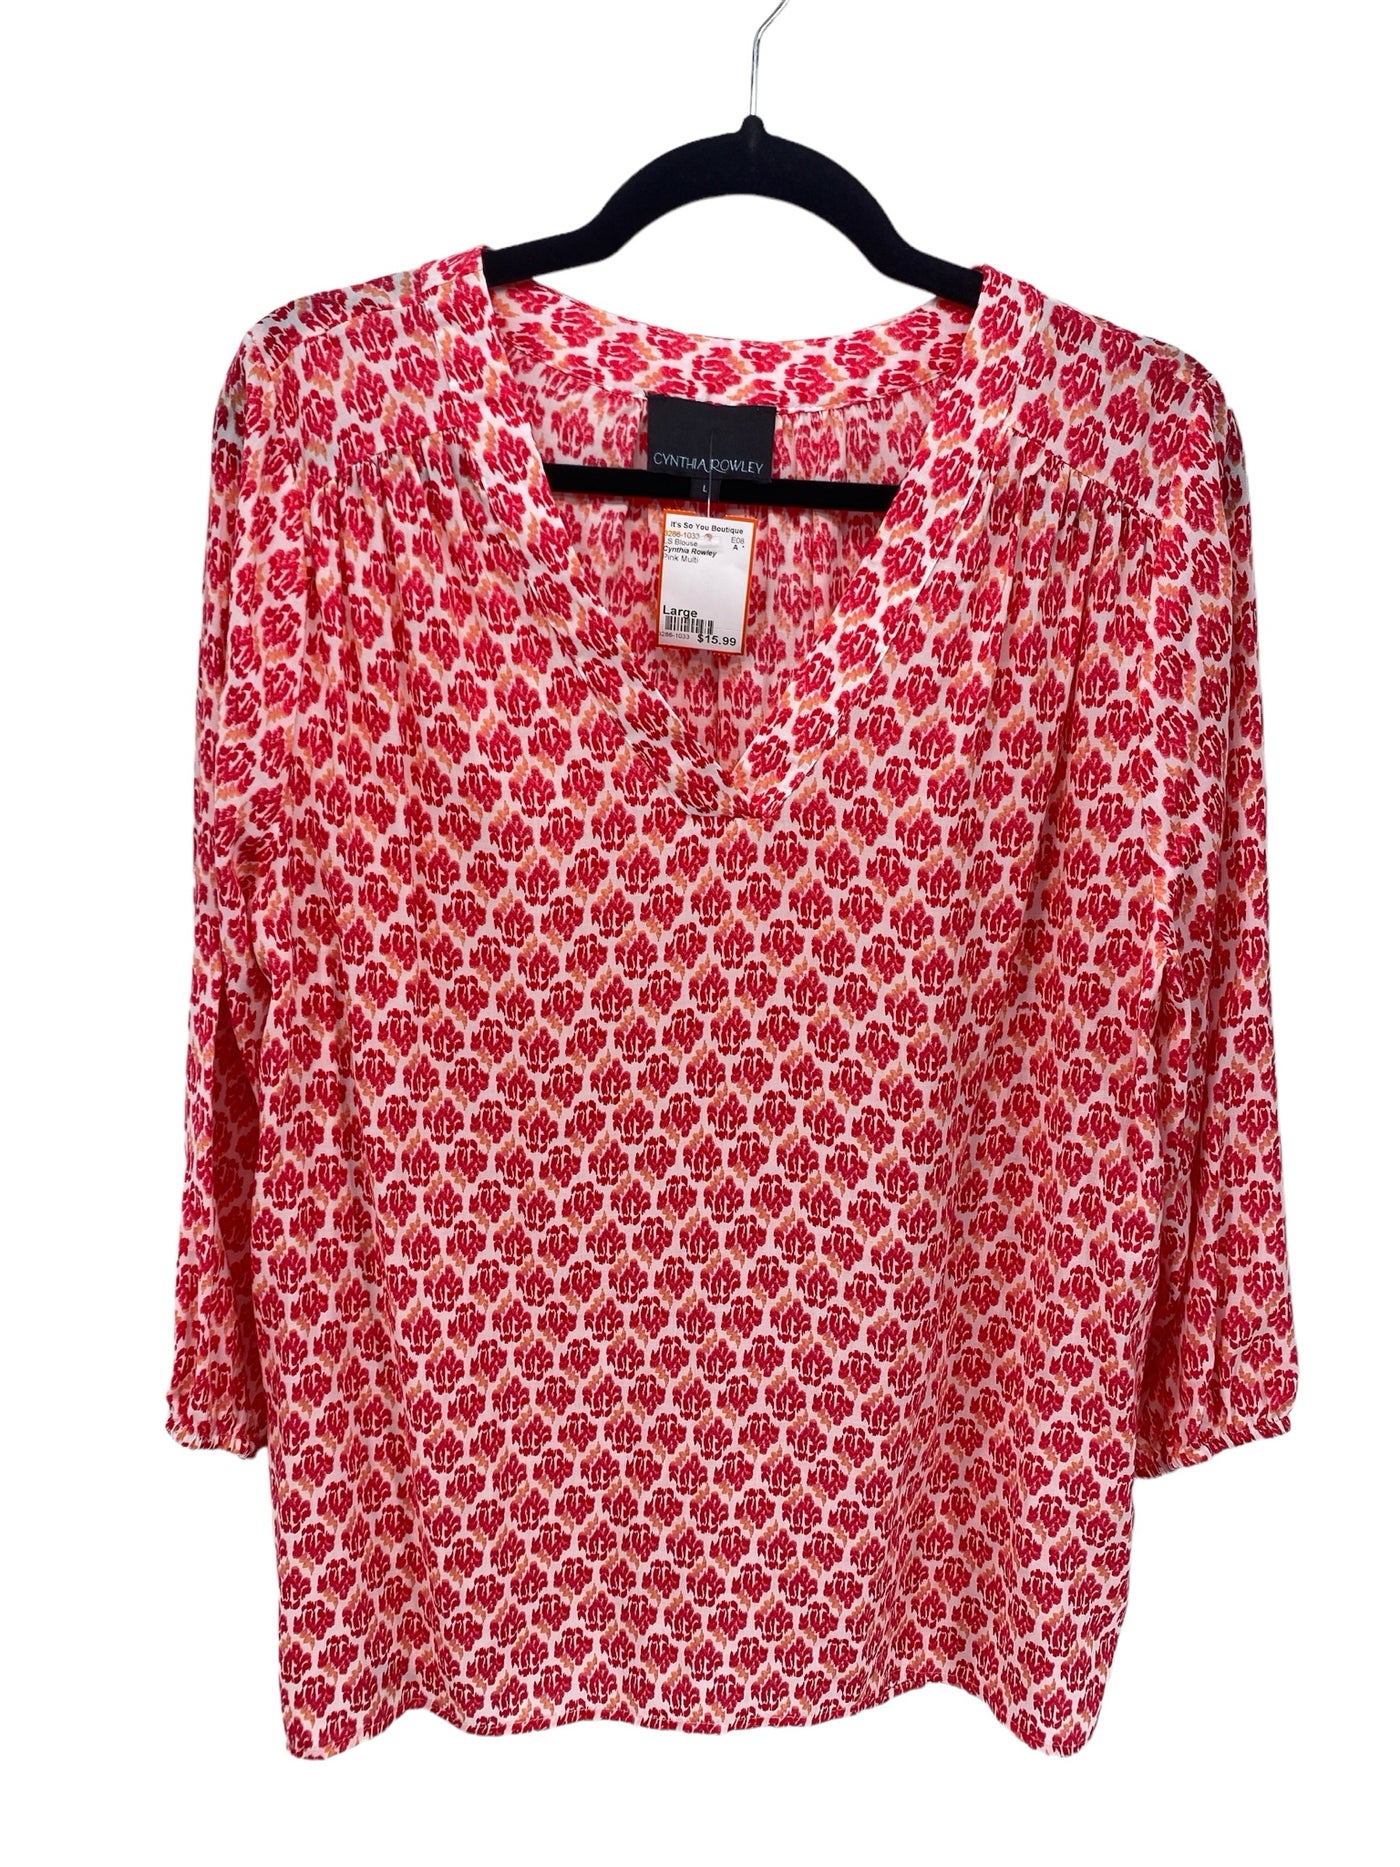 Cynthia Rowley Misses Size Large Pink Multi LS Blouse